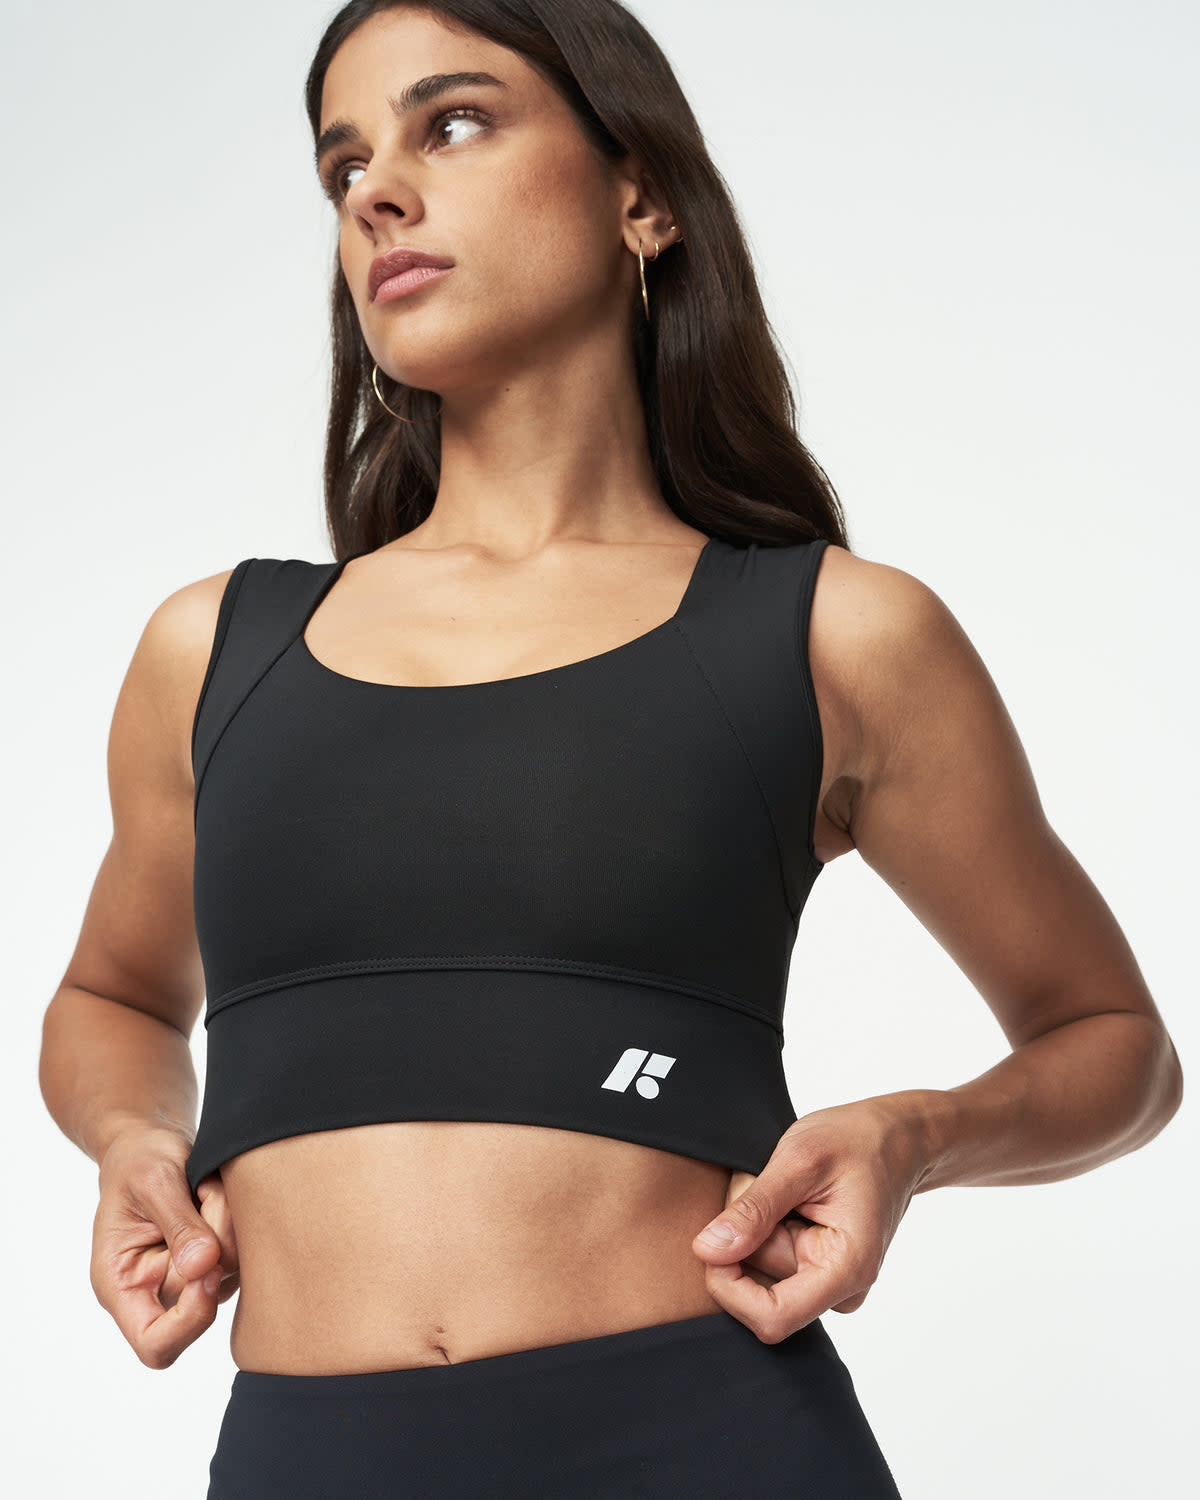 Achieve Better Posture and Body Shape with Ultra Flex Posture Corrector